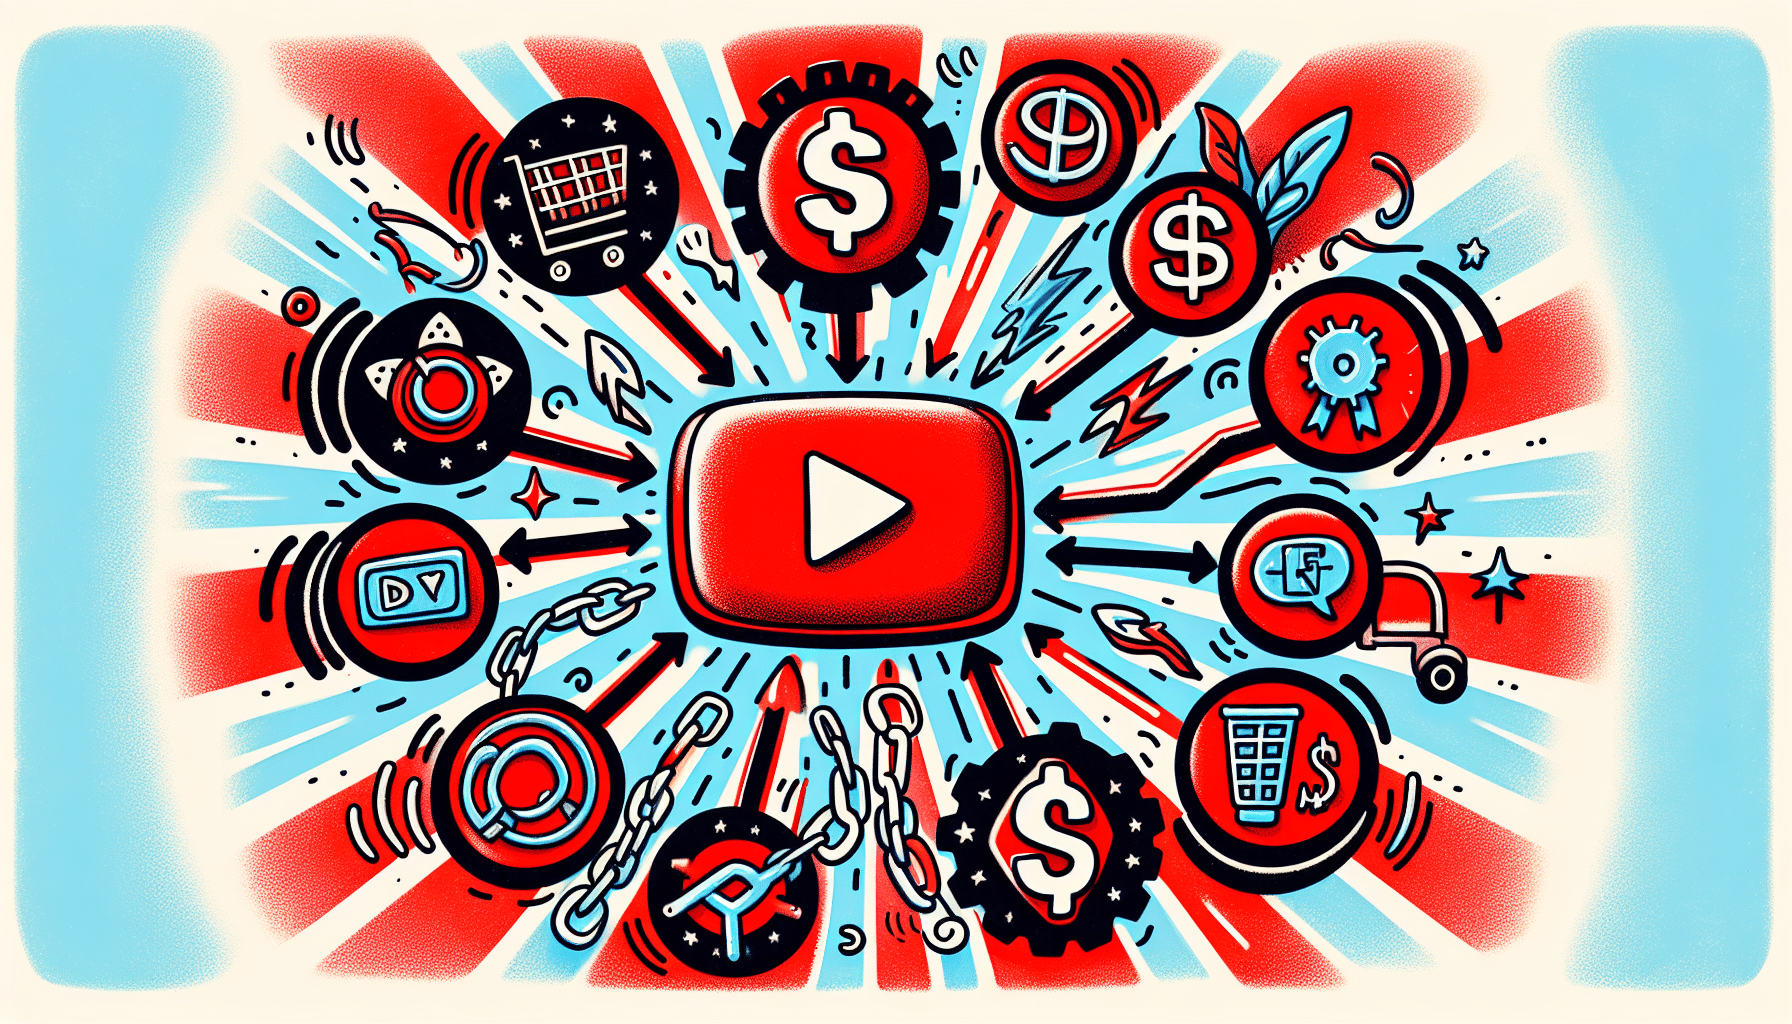 Colorful illustration of various monetization strategies for YouTube channels